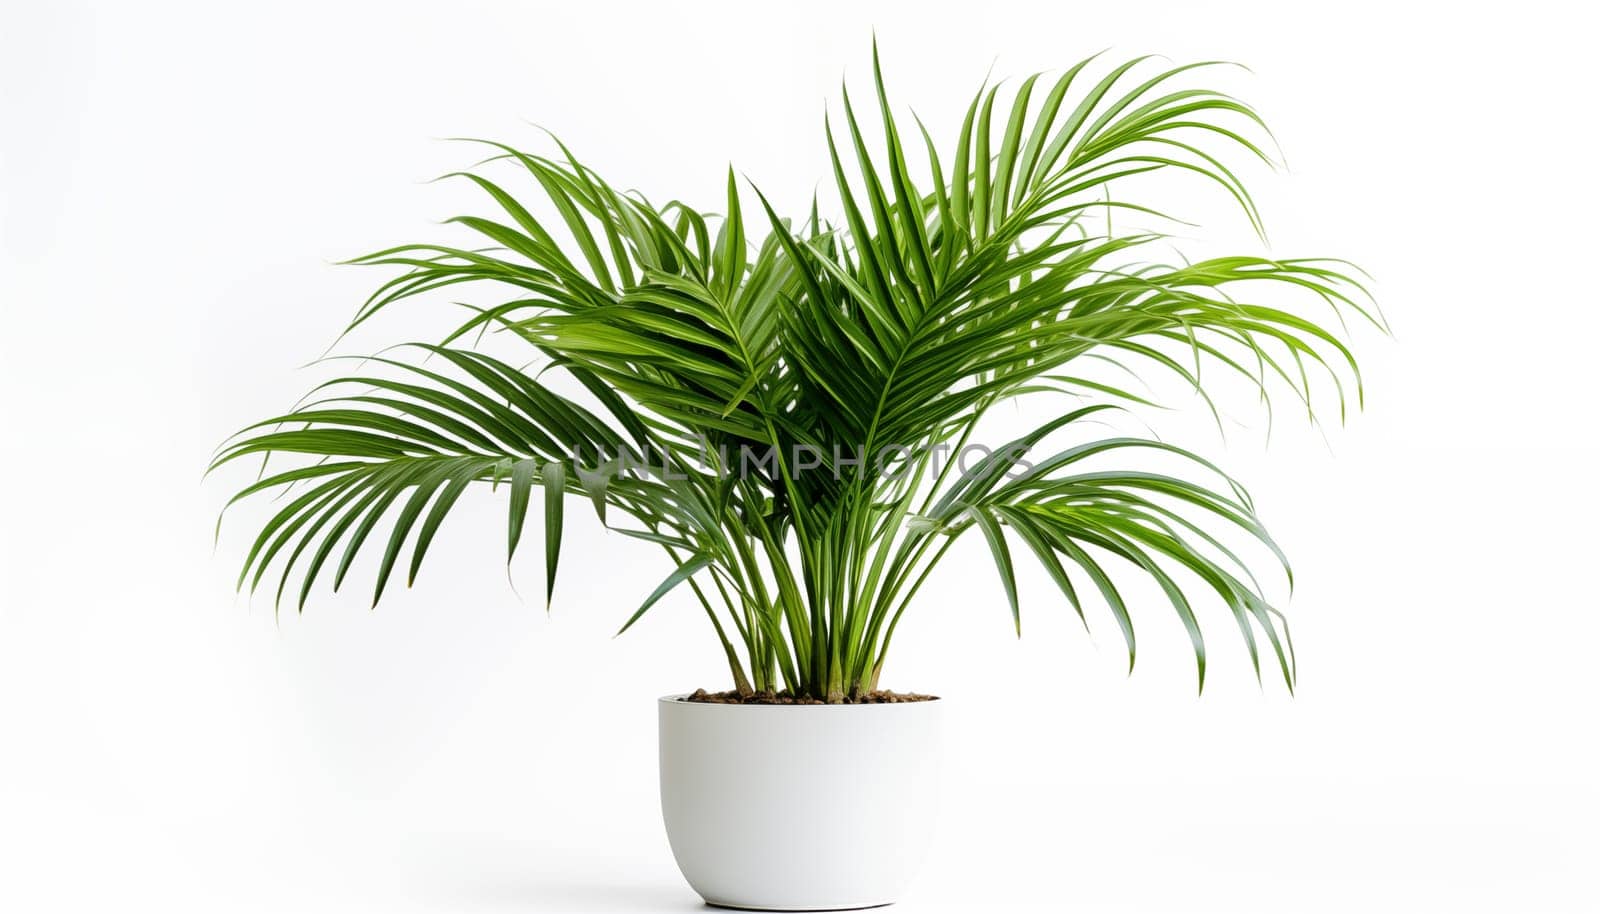 Parlor Palm, isolated, white background. High quality photo